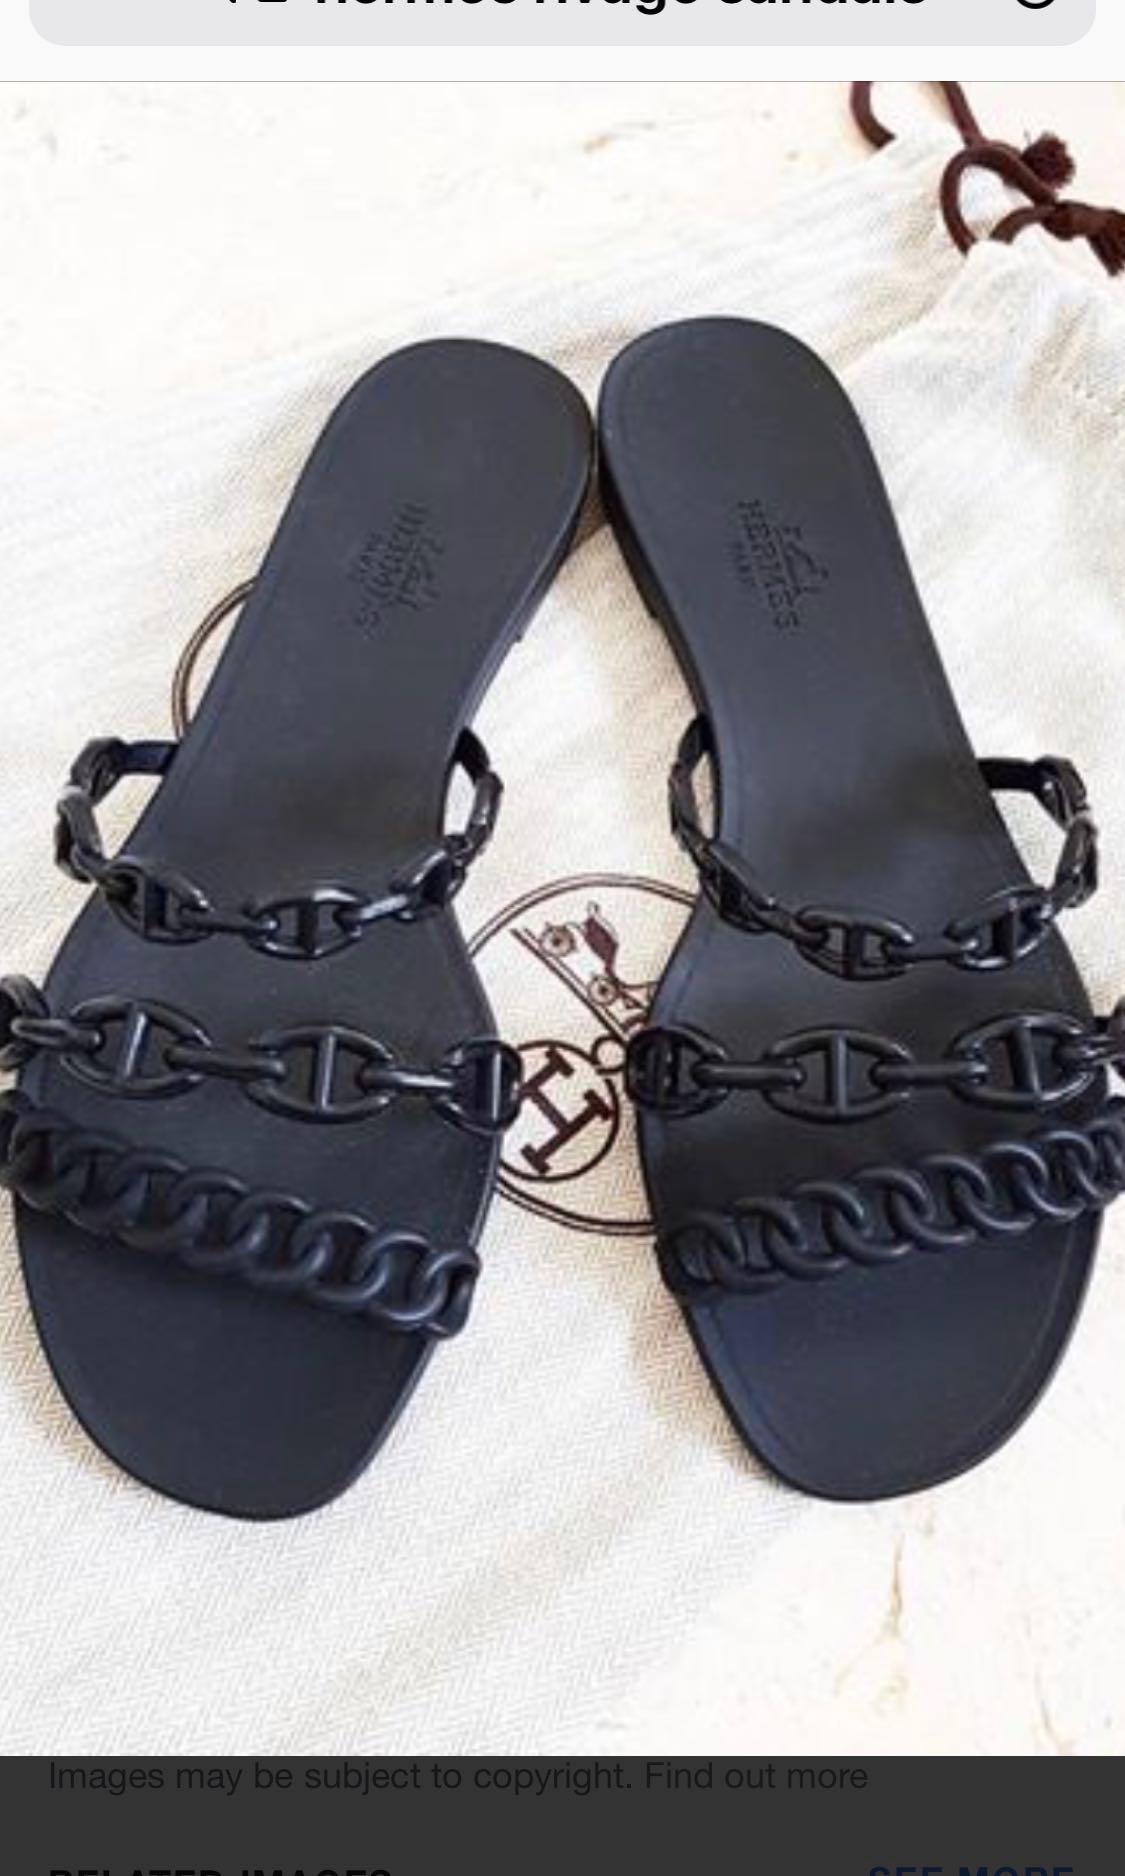 Authentic Hermes rivage sandals size 37 